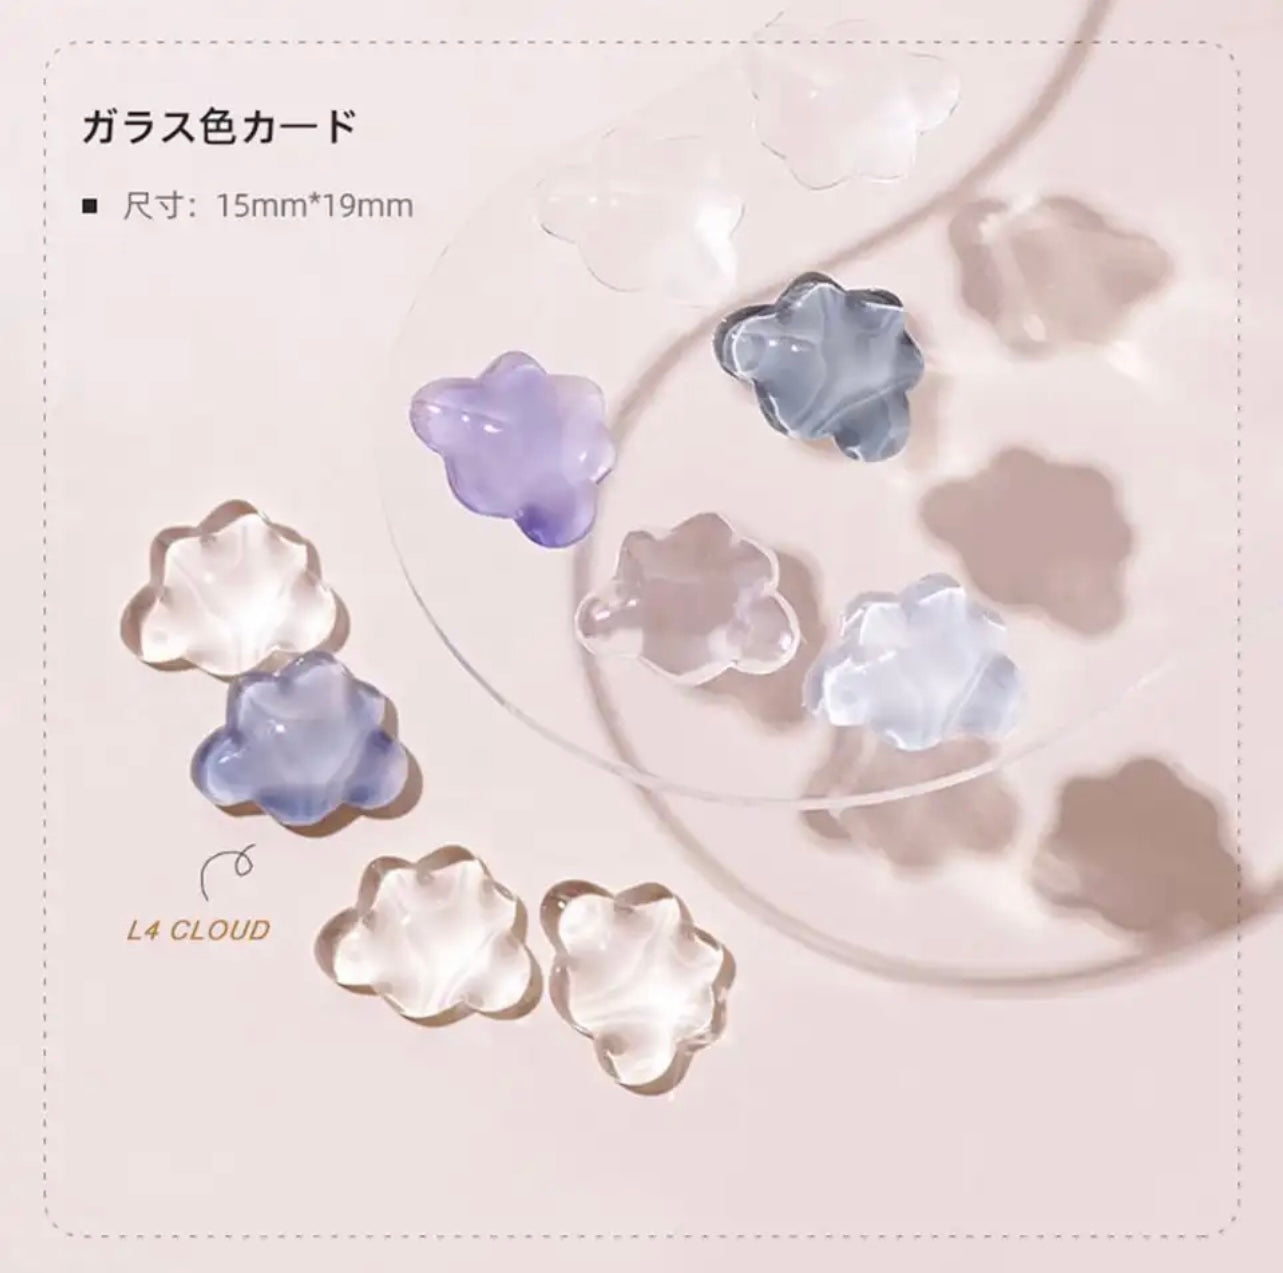 Nail swatch Stones - Cloud